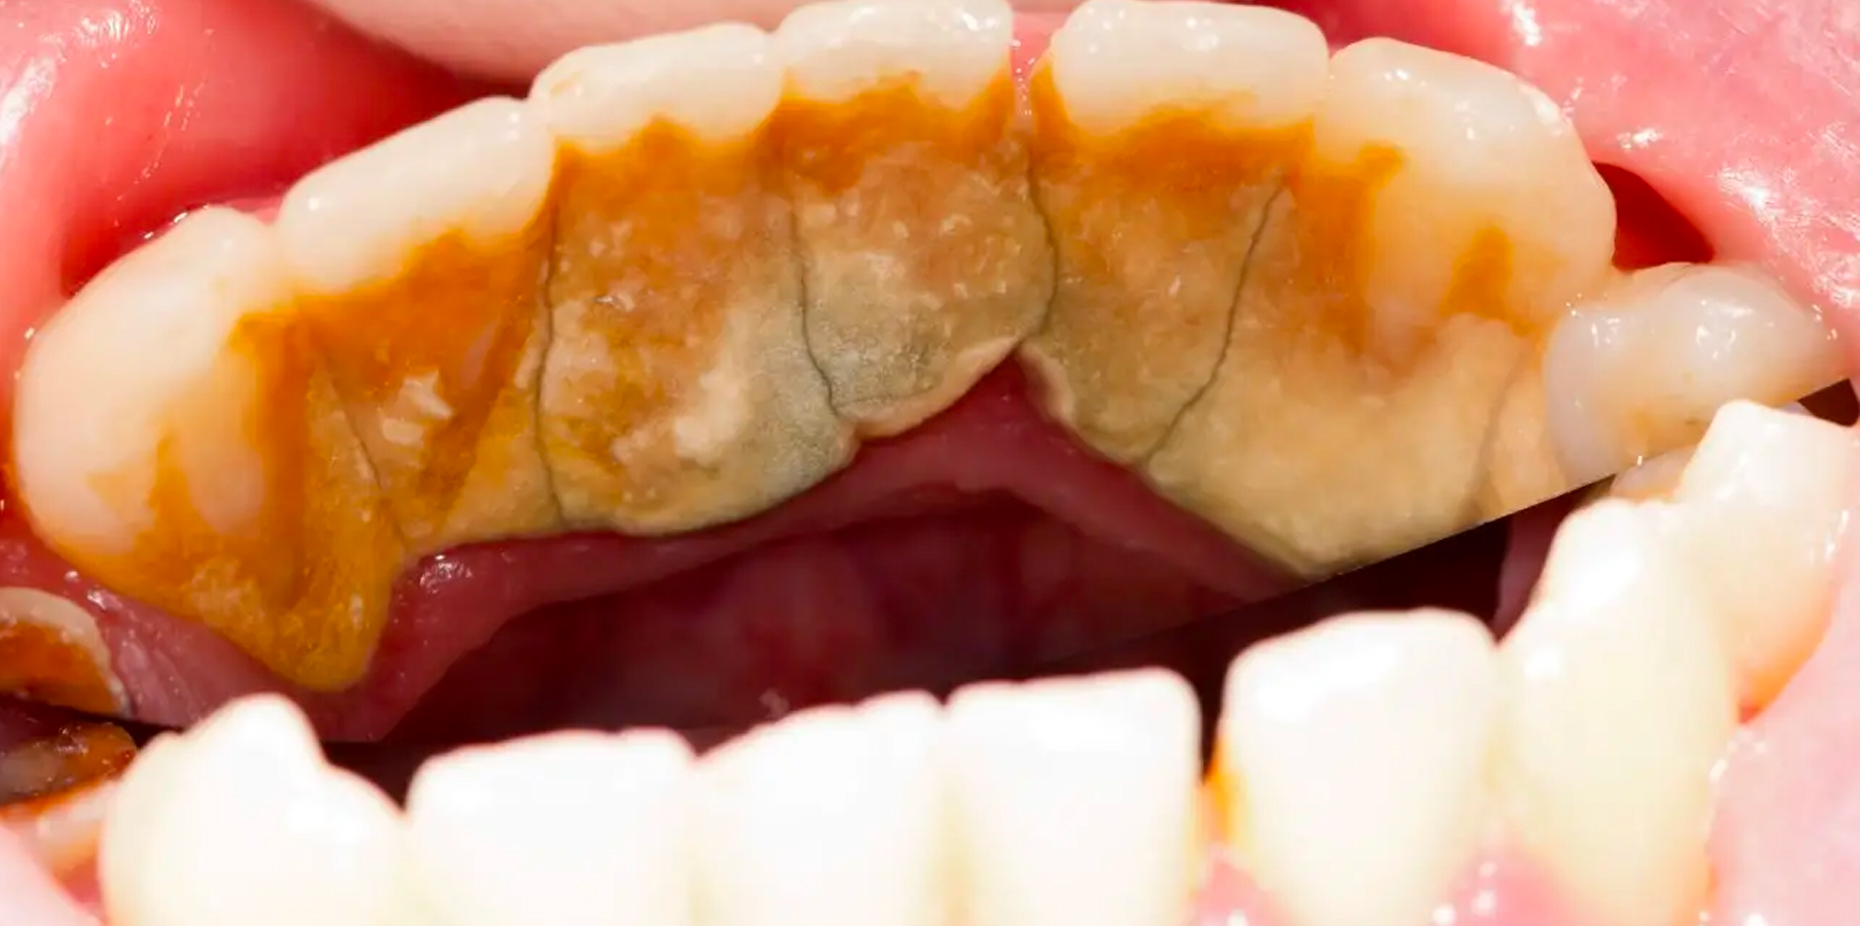 How to Remove Plaque & Tartar Buildup from Your Teeth – 9 Ways